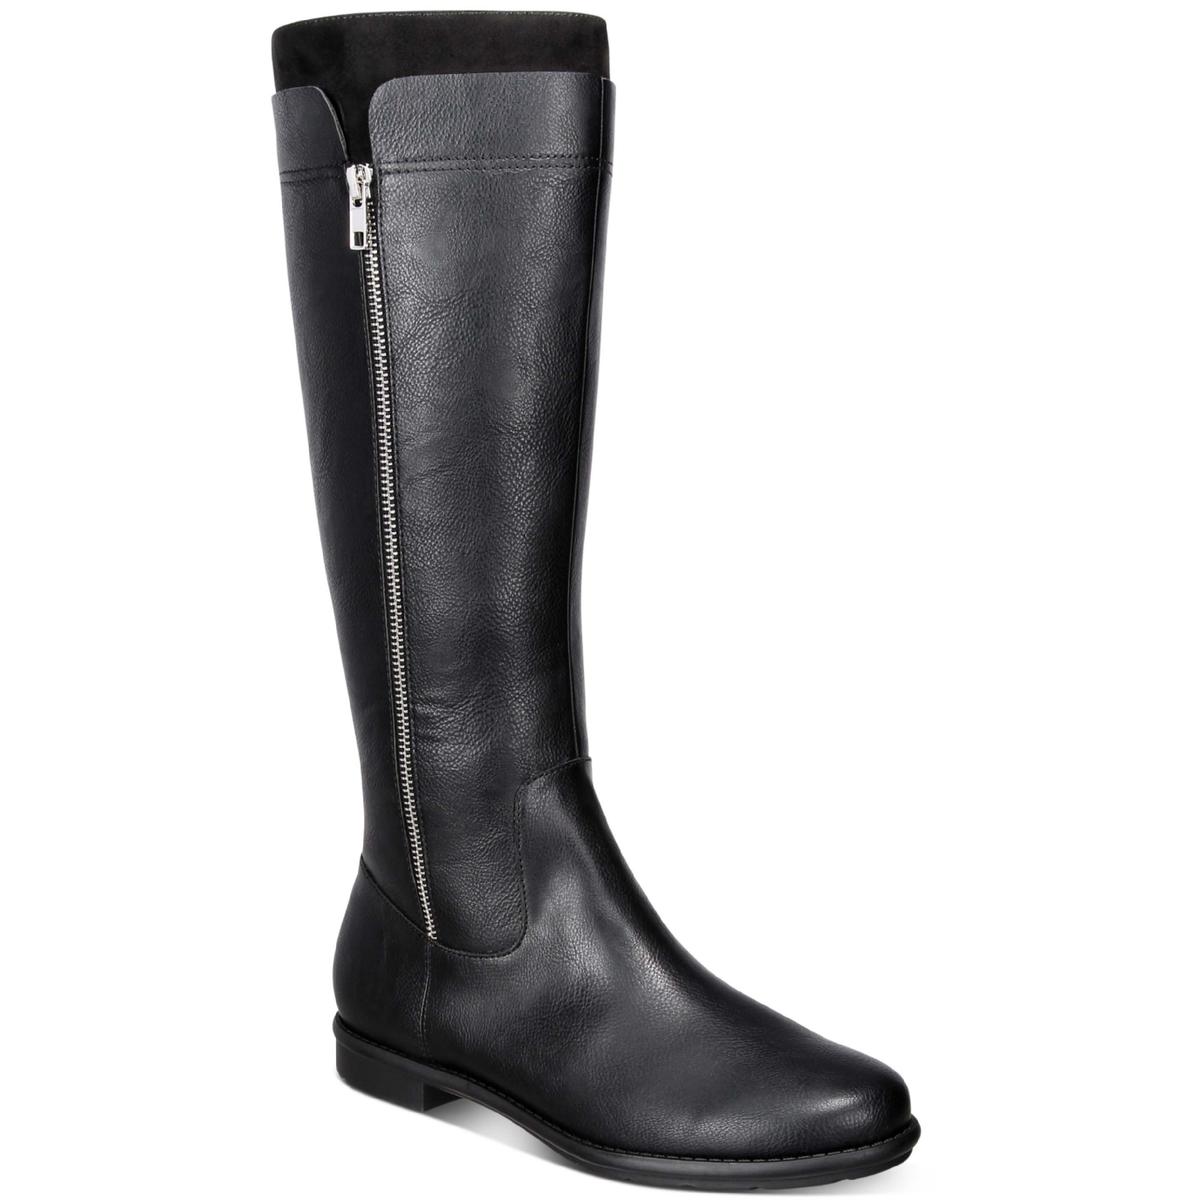 Style & Co. Olliee Womens Faux Leather Tall Knee-High Boots